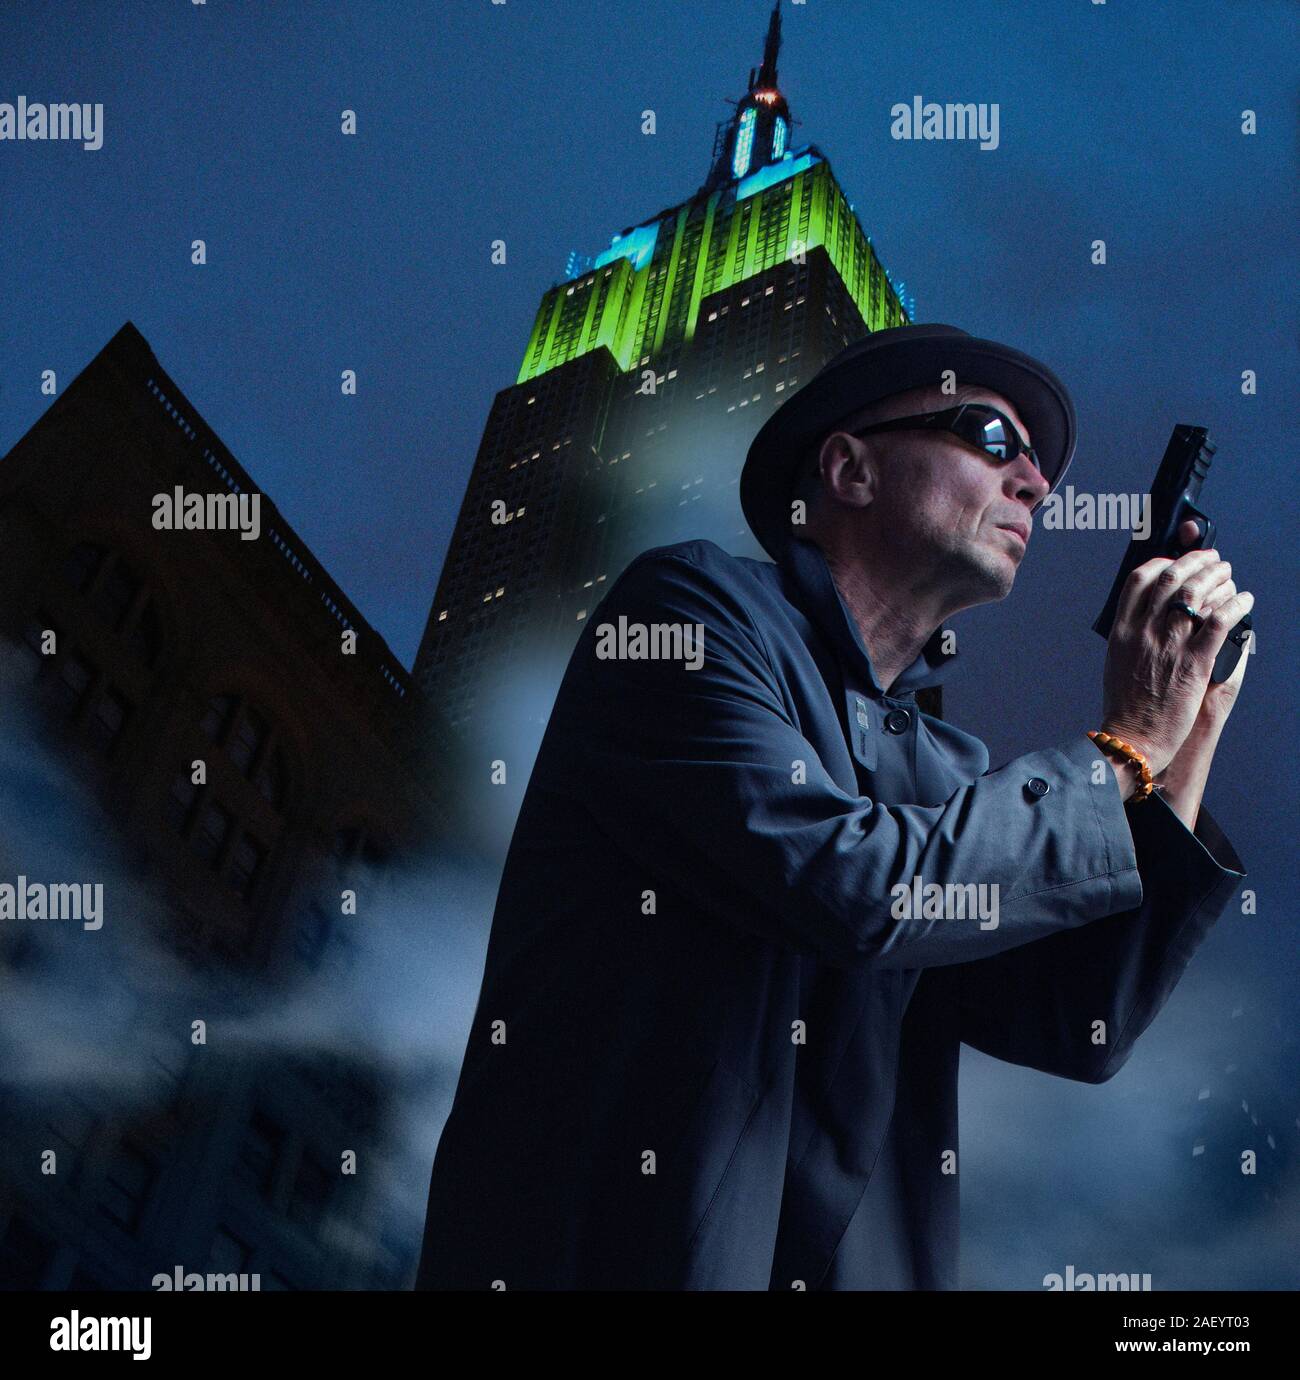 Low Angle View of Mysterious Man with Handgun against Empire State Building Stock Photo